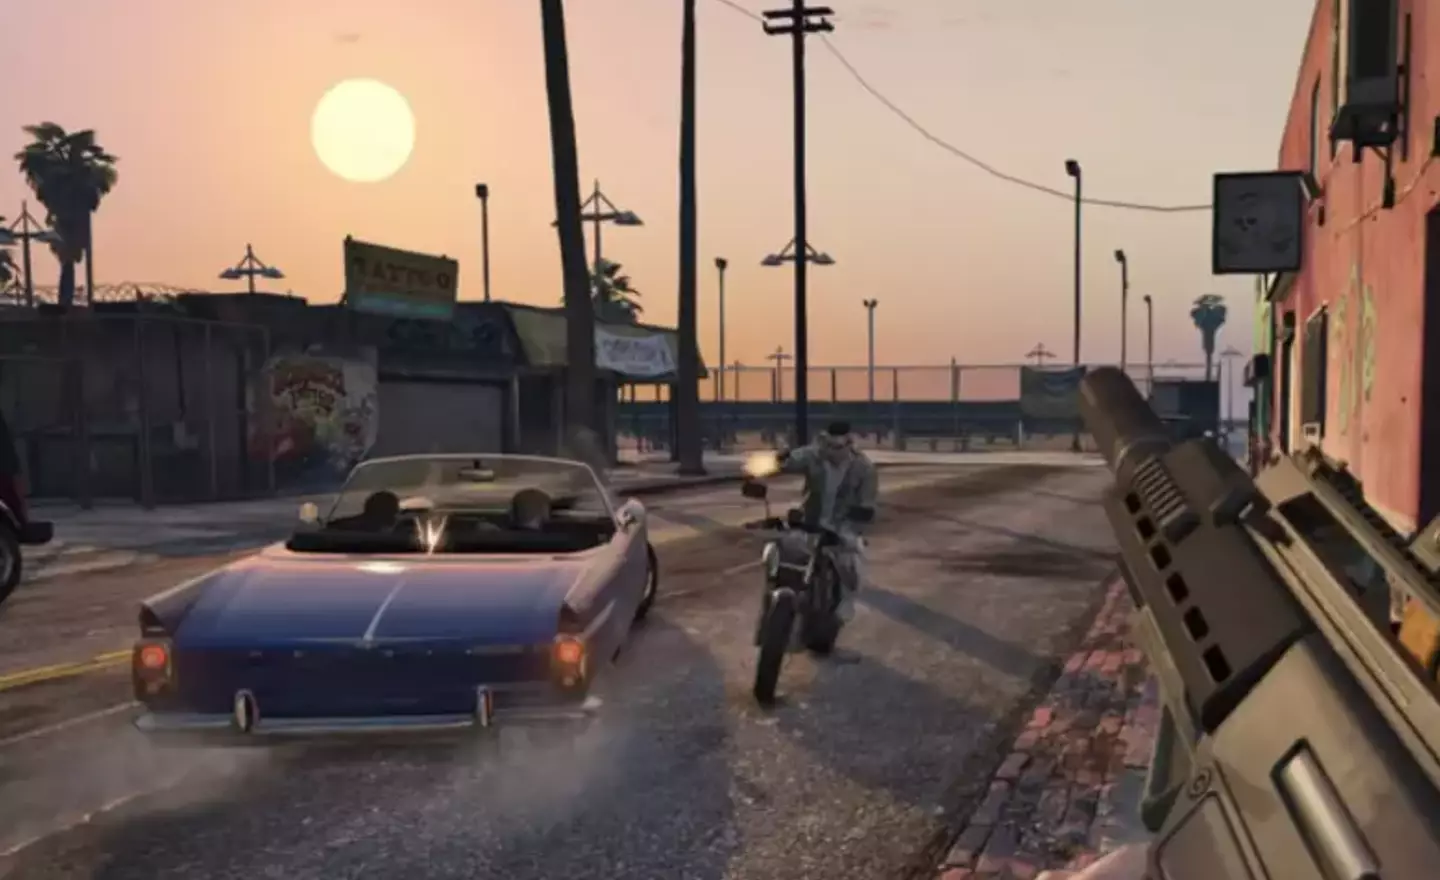 GTA 6 could be launching sooner than fans think.